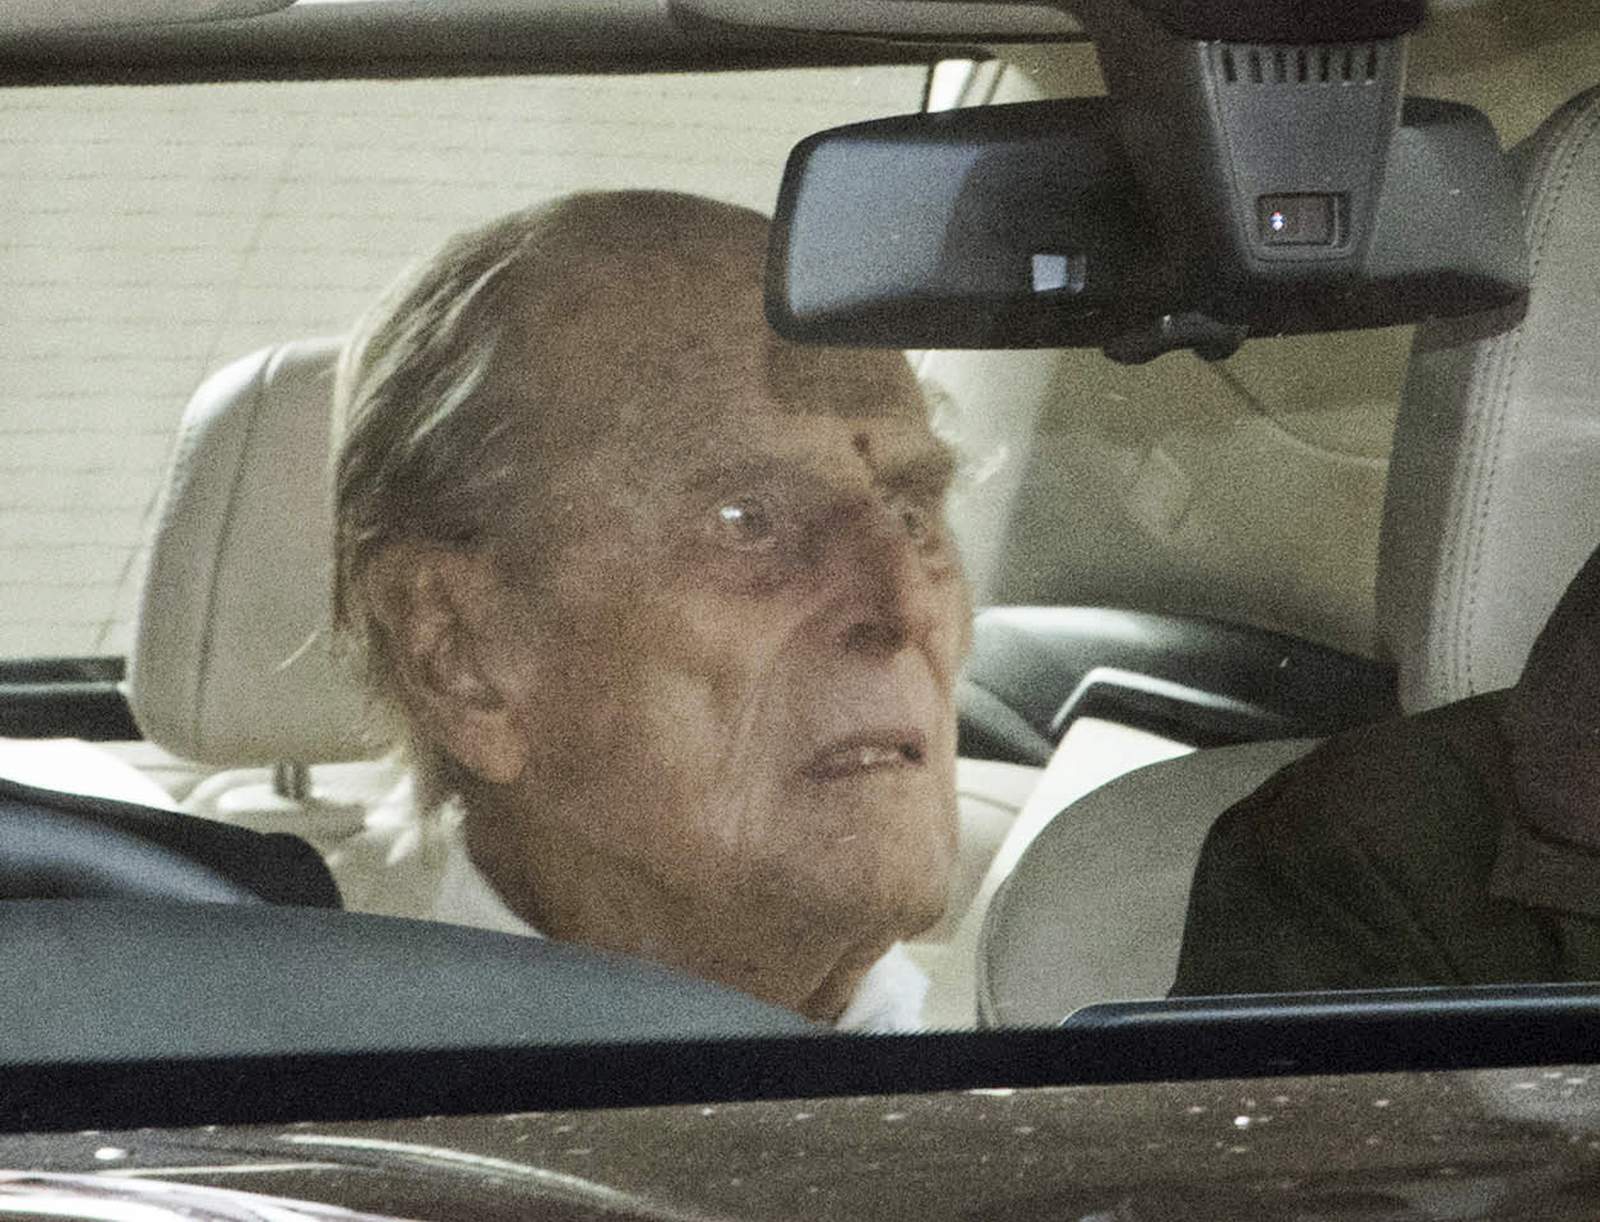 Britain's Prince Philip returns home after treatment